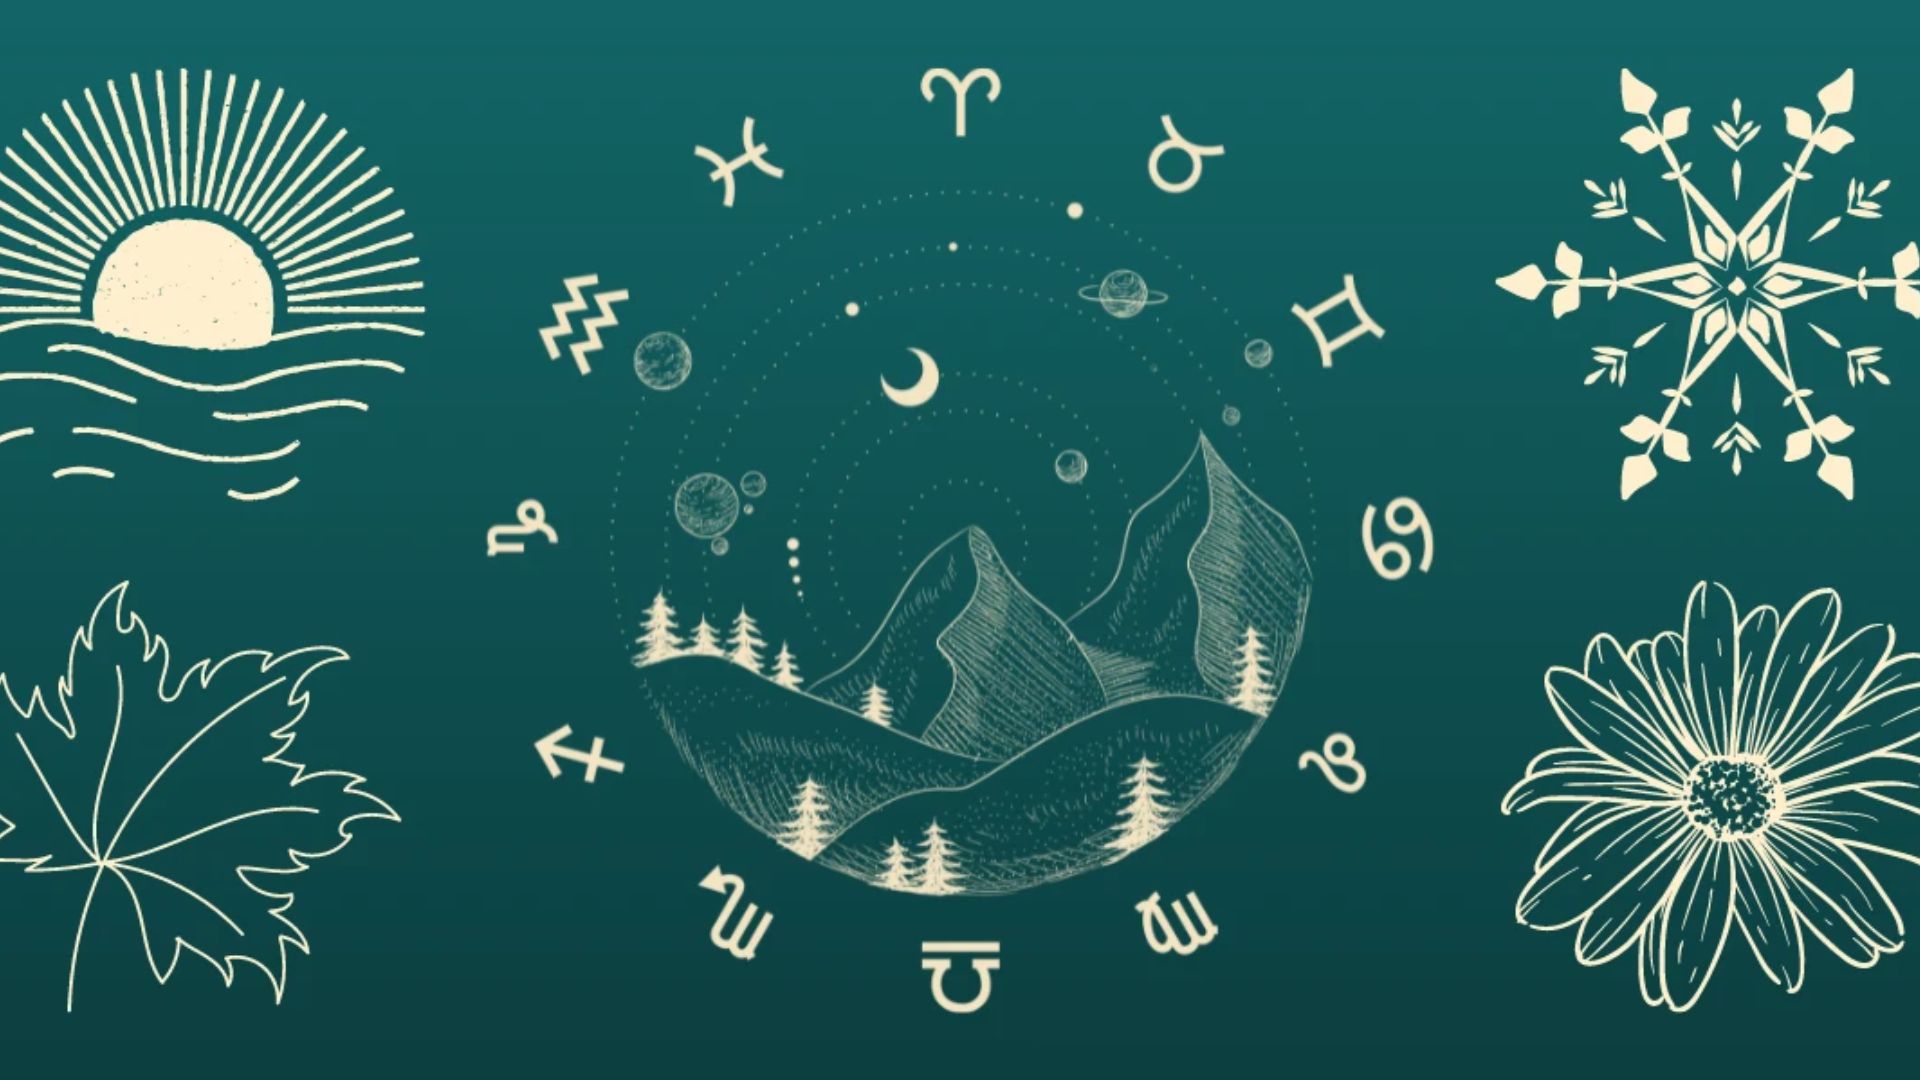 Zodiac Sign With Planets And Island At The Centre And Each Season Representation At Corner